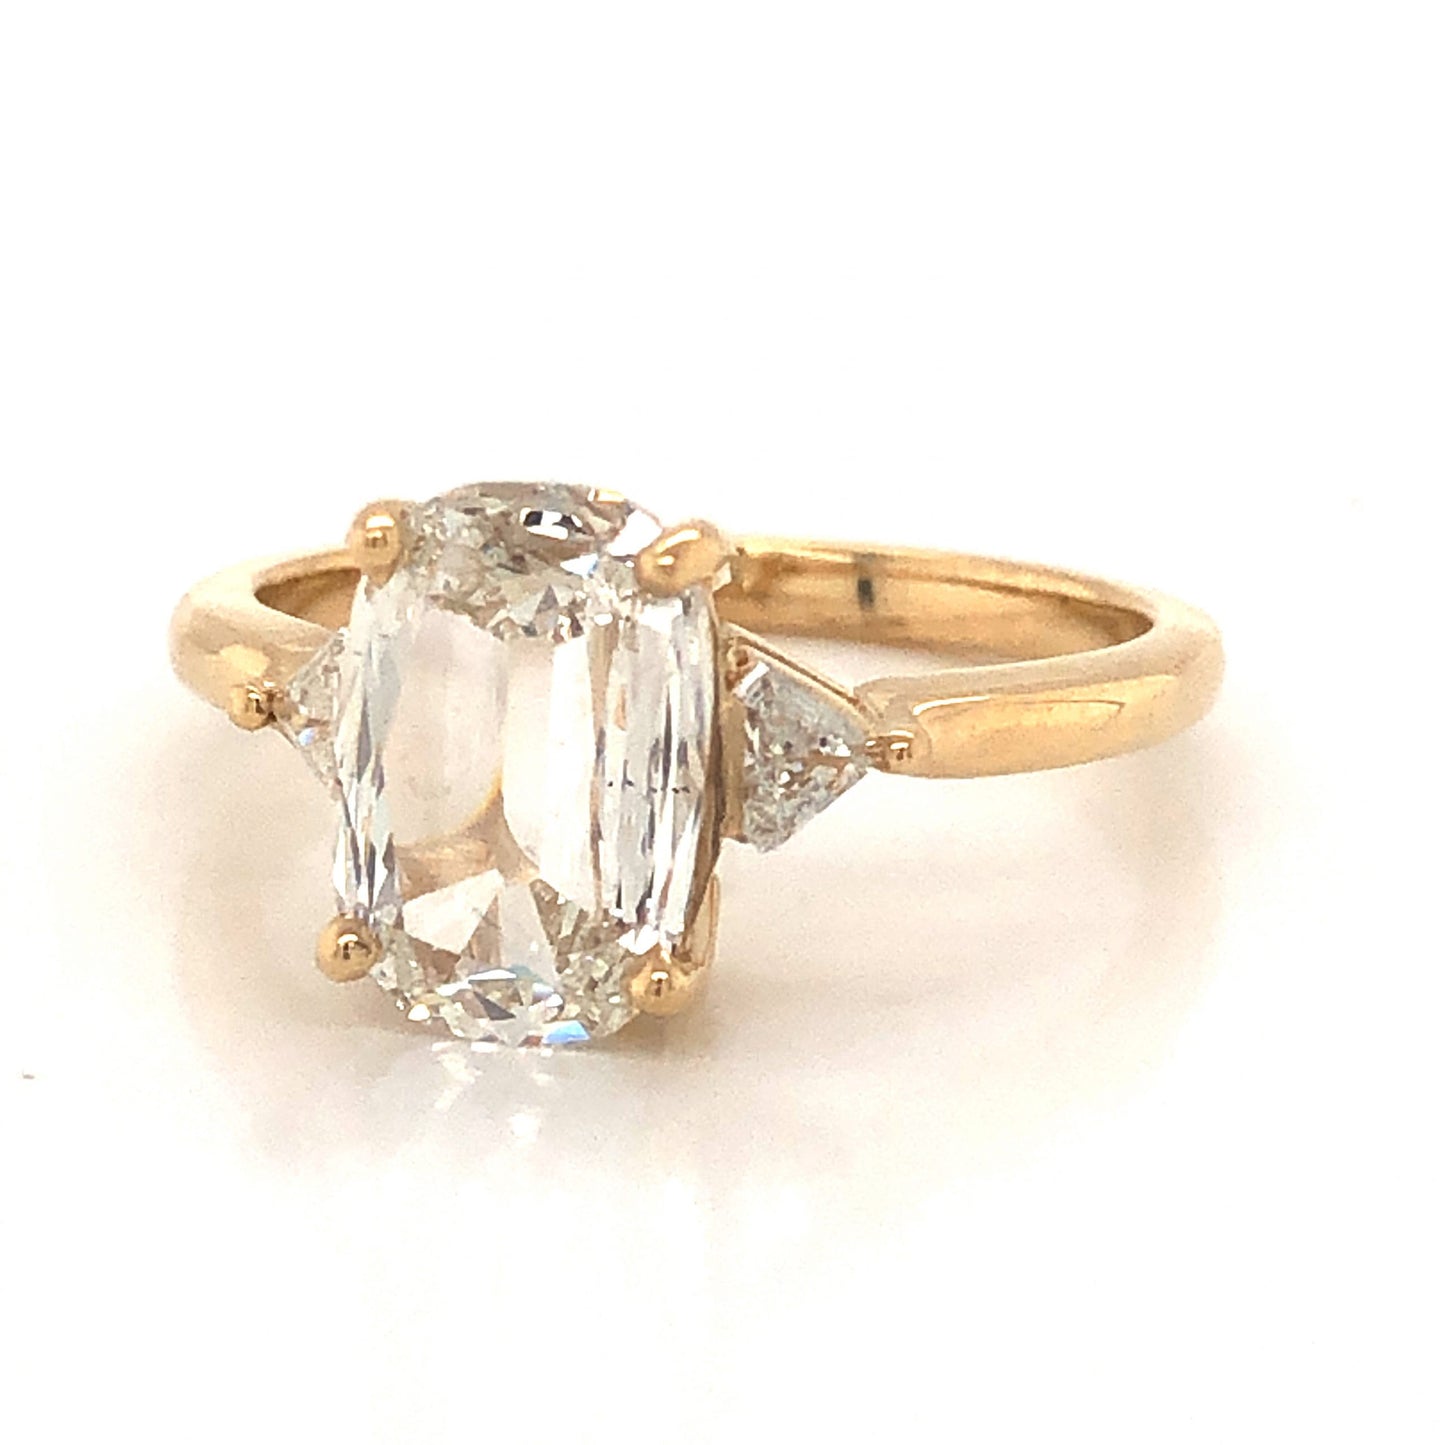 1.50 Old Mine Cushion Cut Diamond Engagement Ring in 14k Yellow Gold